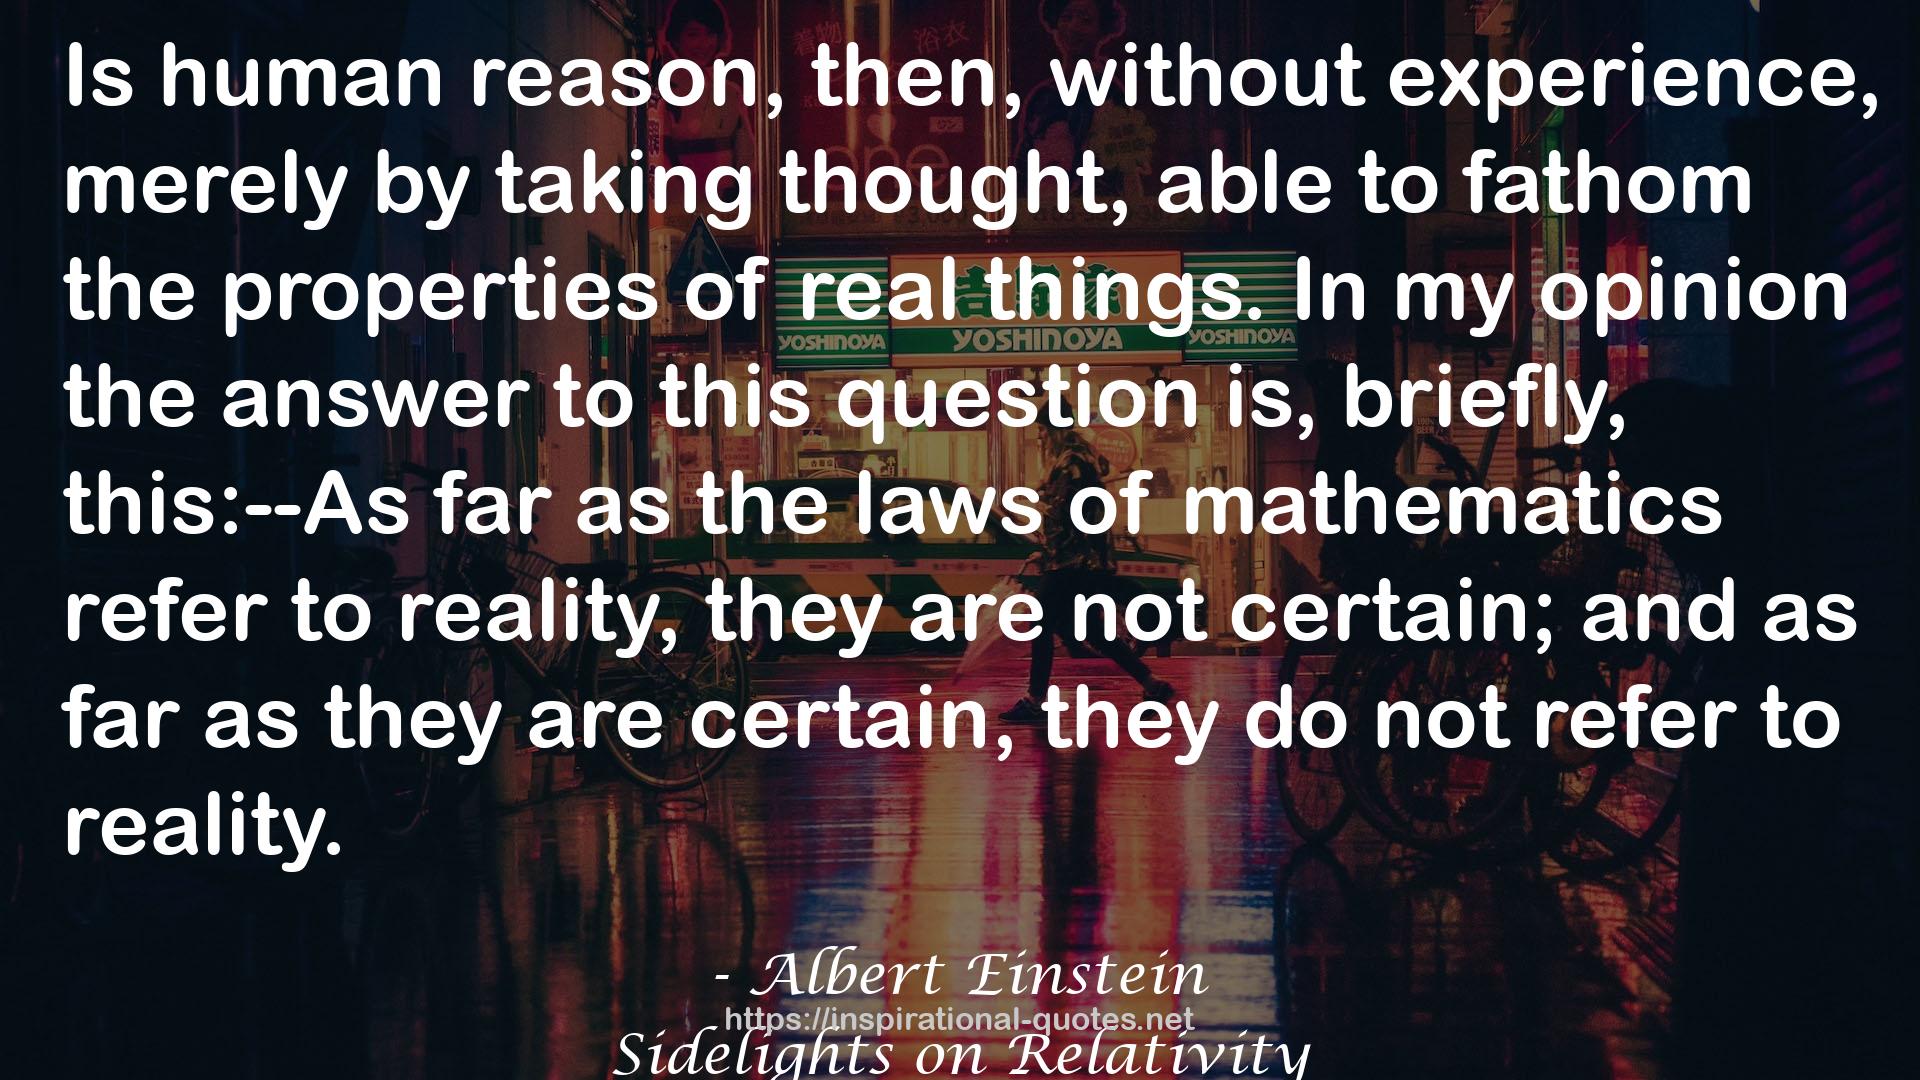 Sidelights on Relativity QUOTES